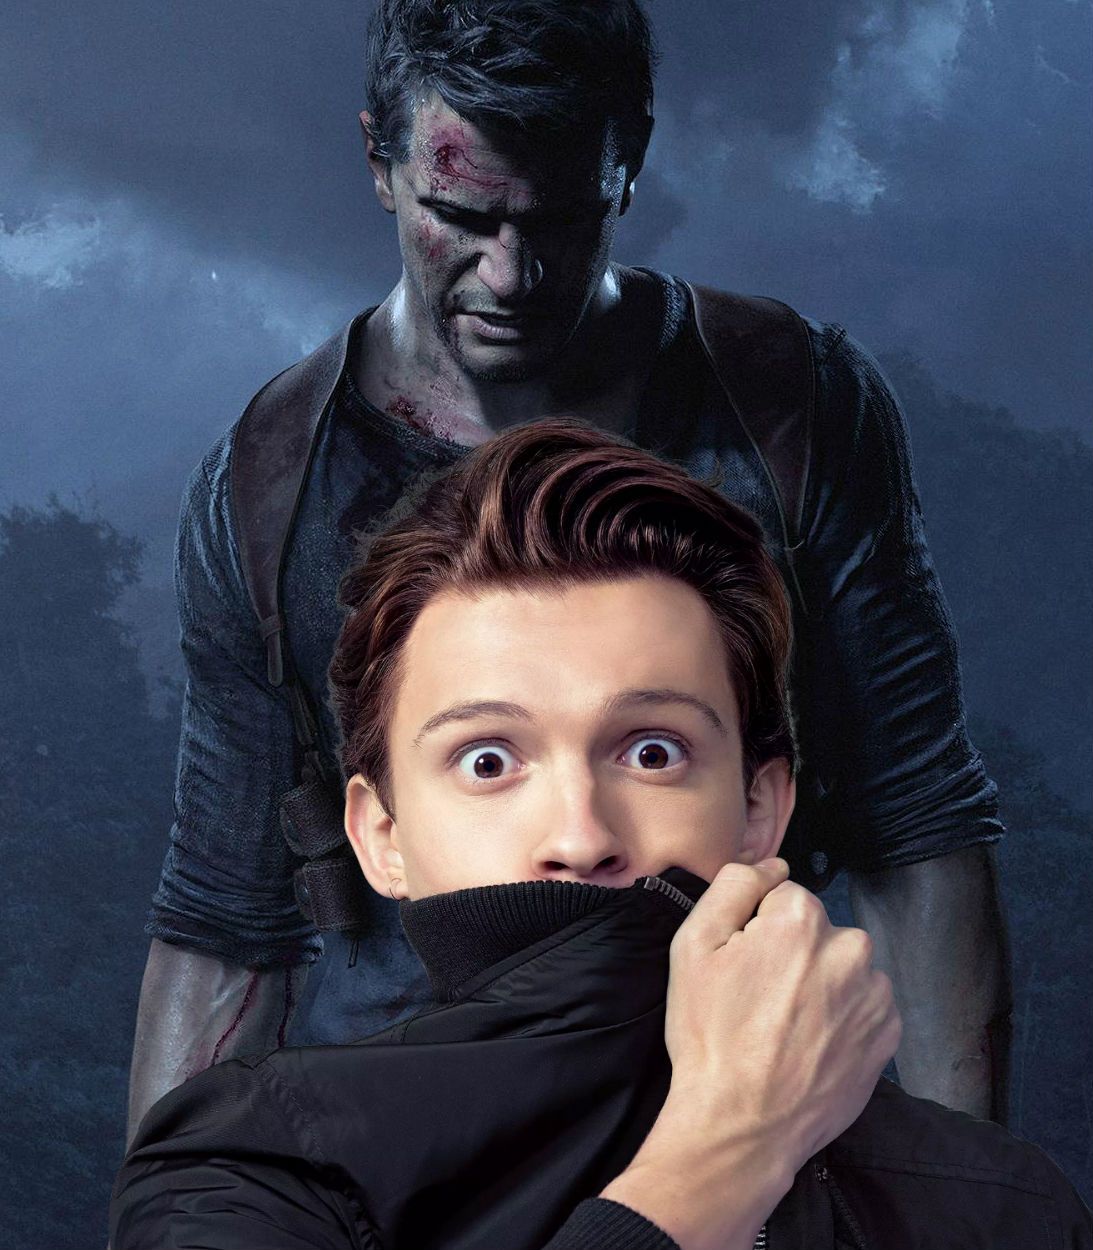 Tom Holland starring as Nathan Drake in the Uncharted movie